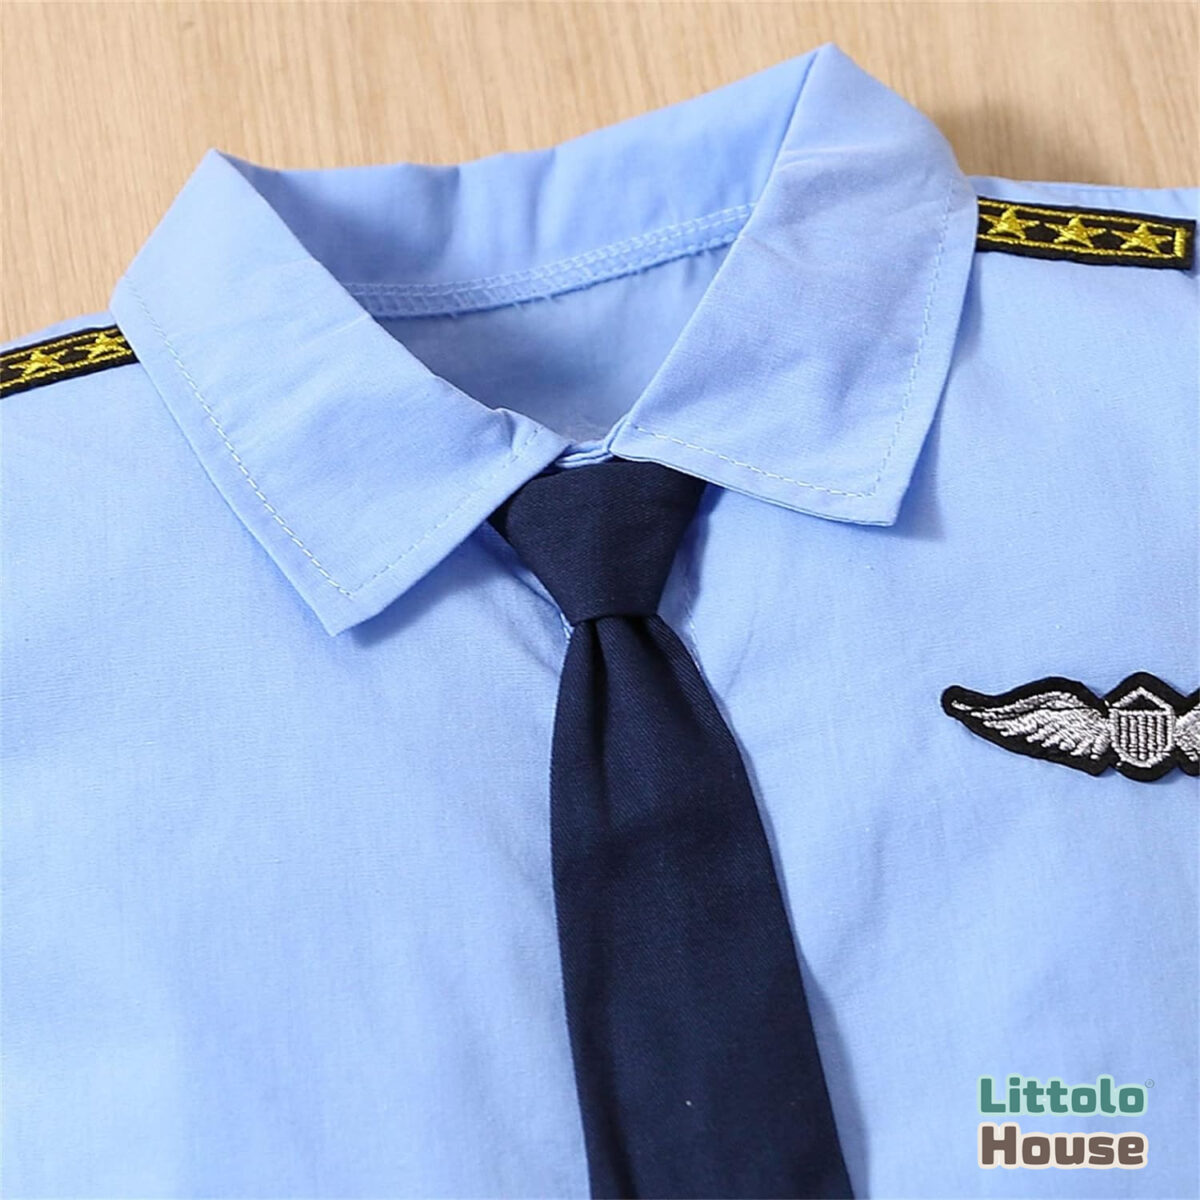 Baby Pilot Costume for Baby phtot shoot props O137 | 12M | Blue